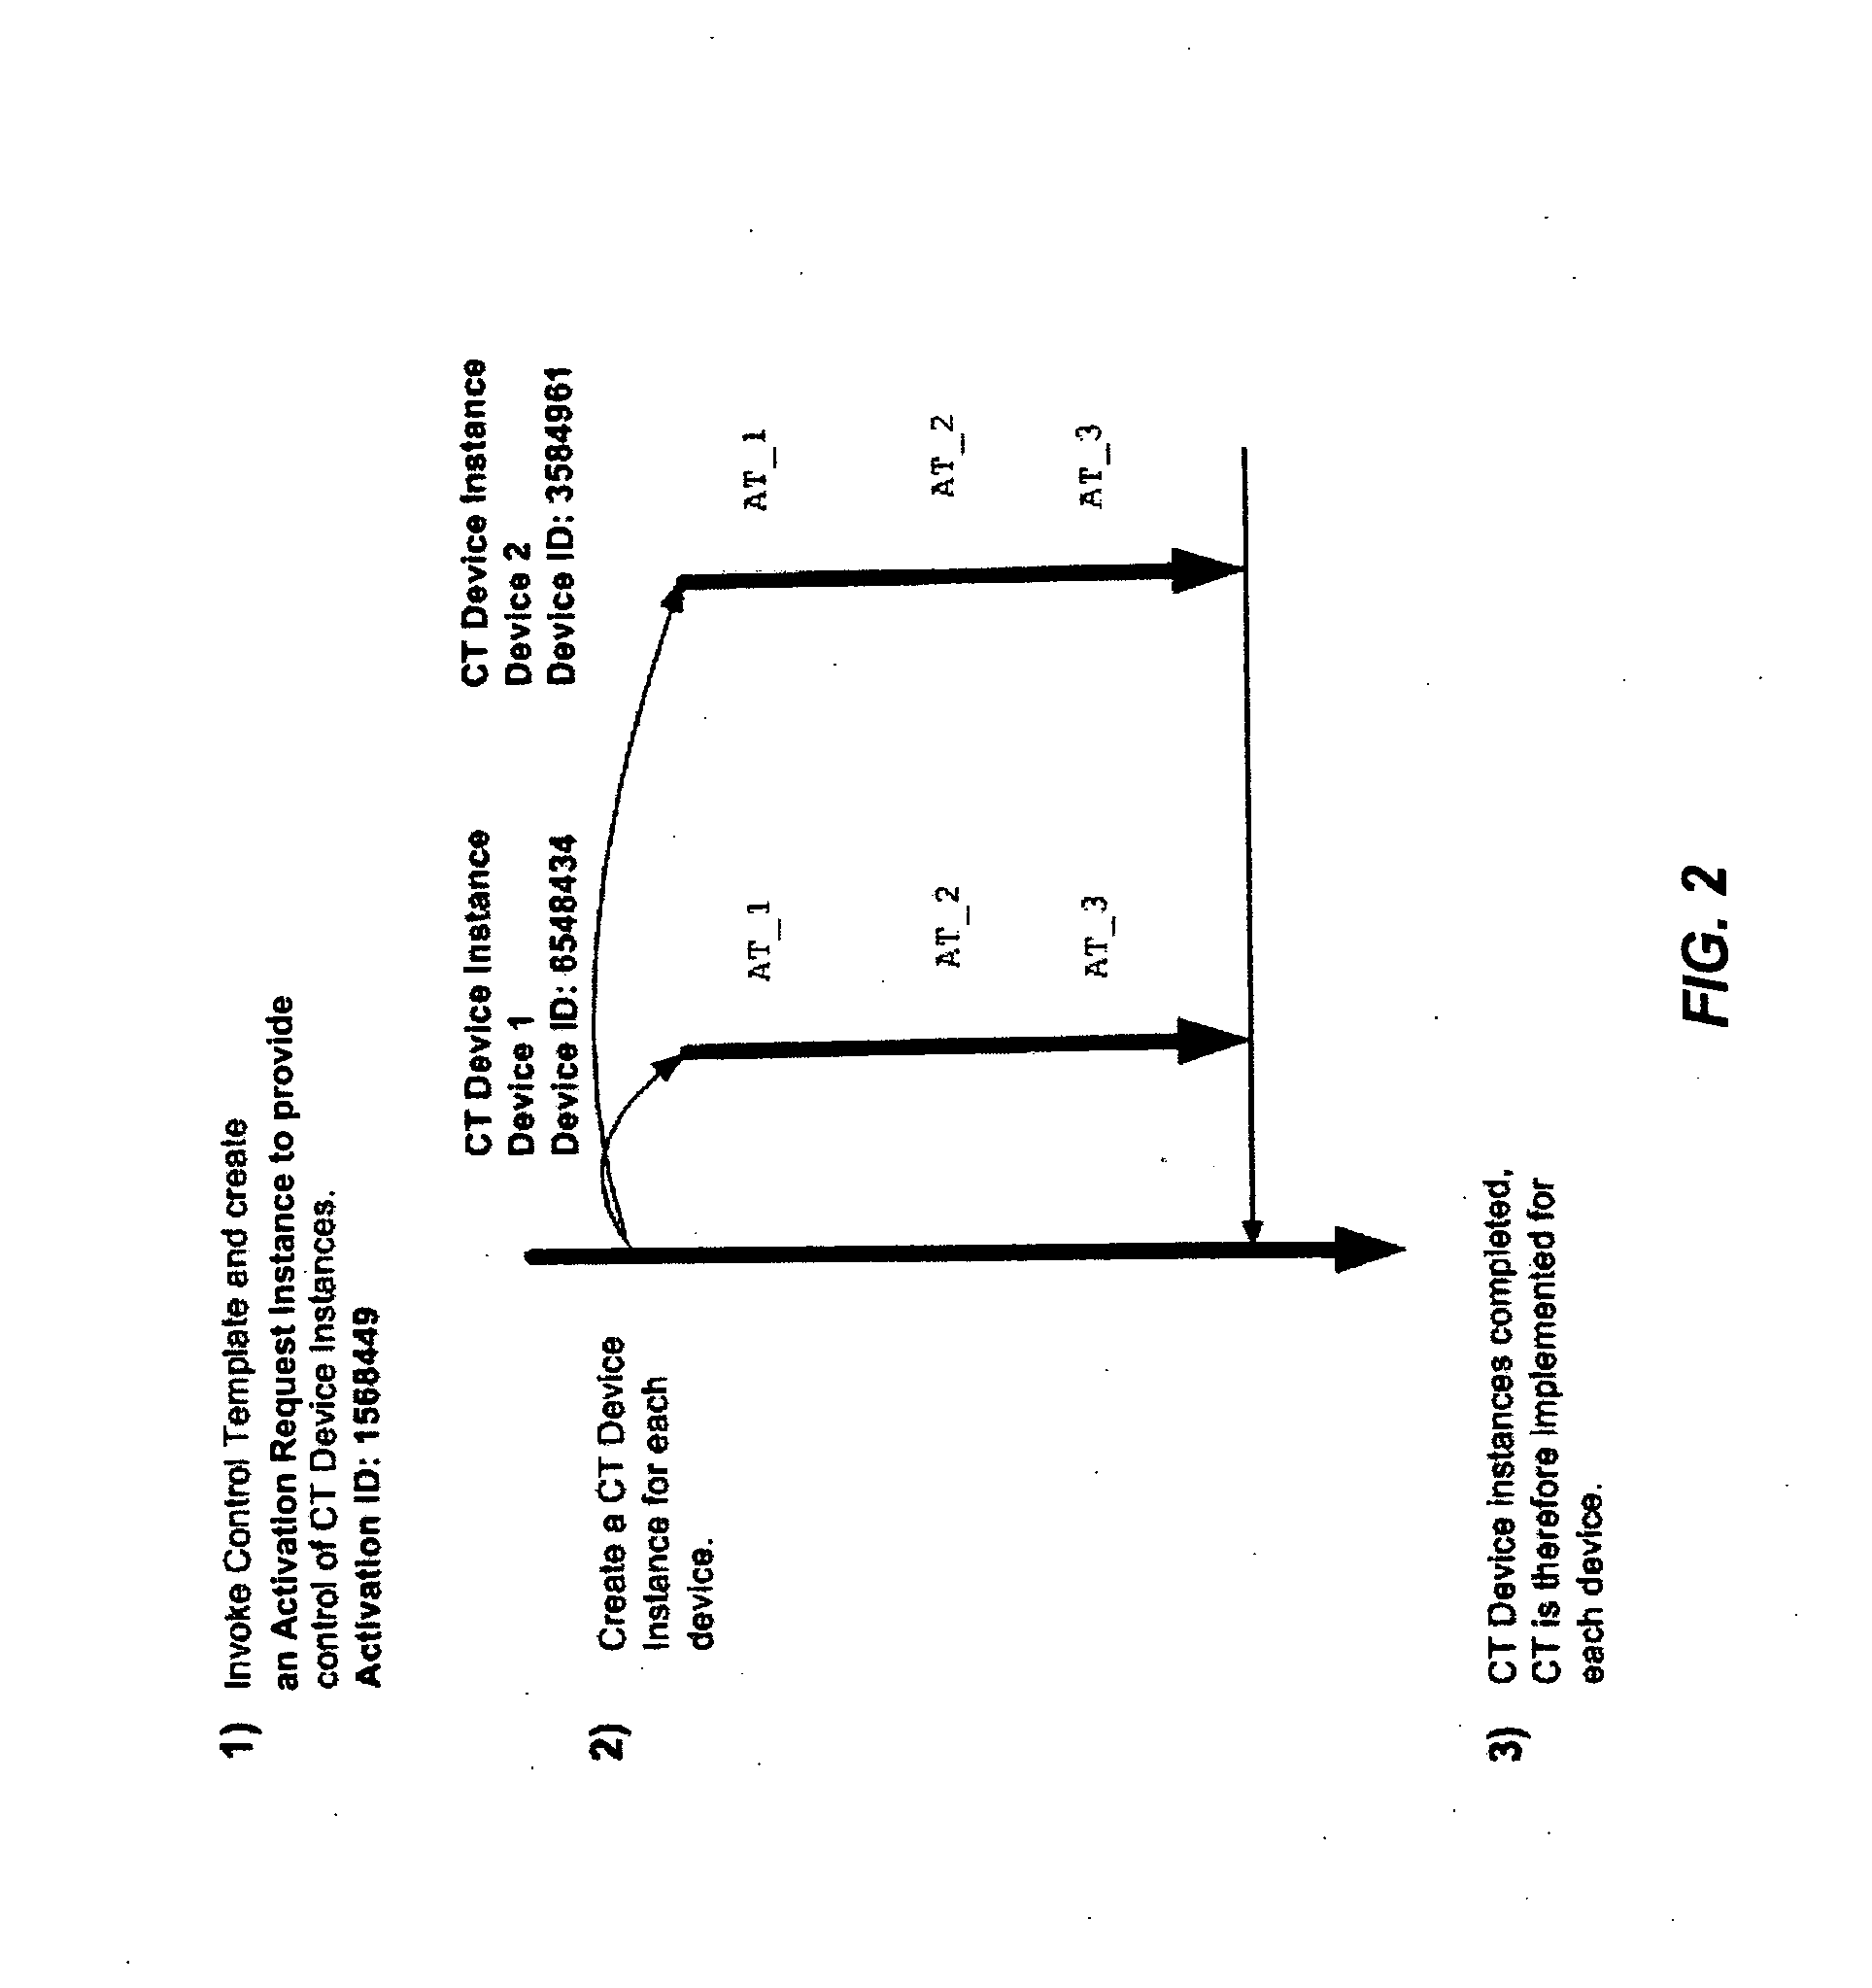 Method of configuring devices in a telecommunications network